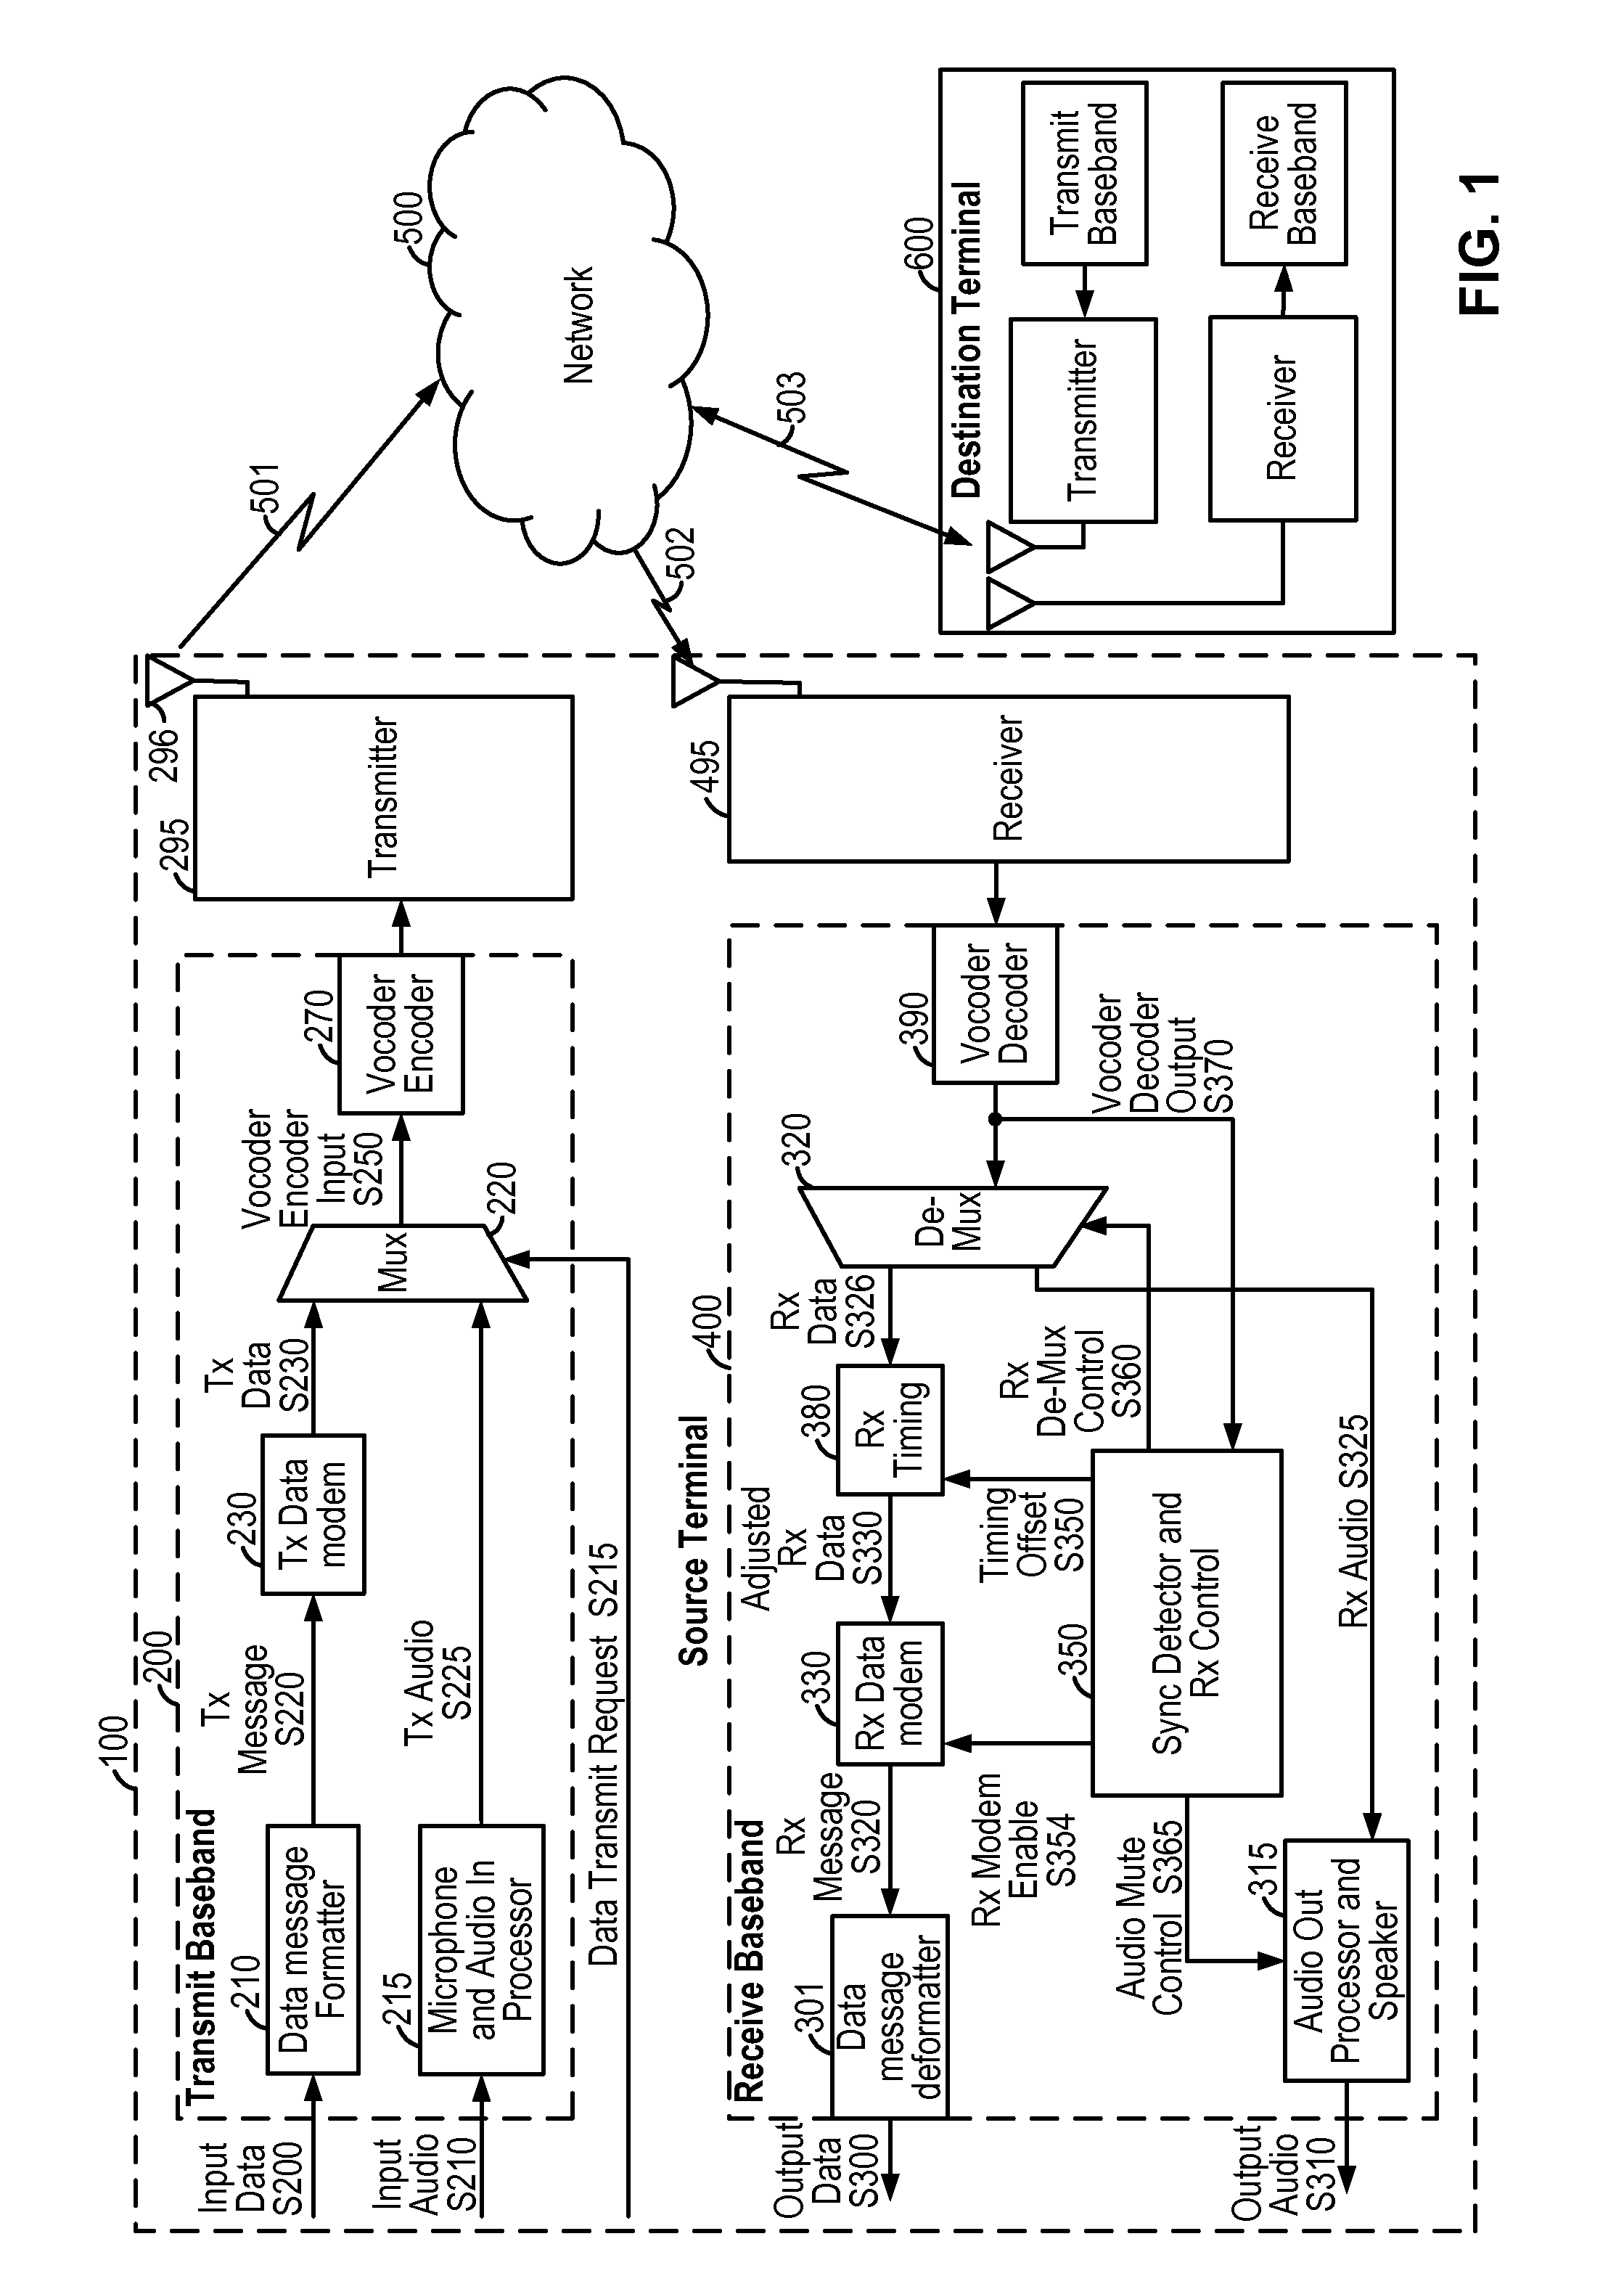 System and method for obtaining a message type identifier through an in-band modem